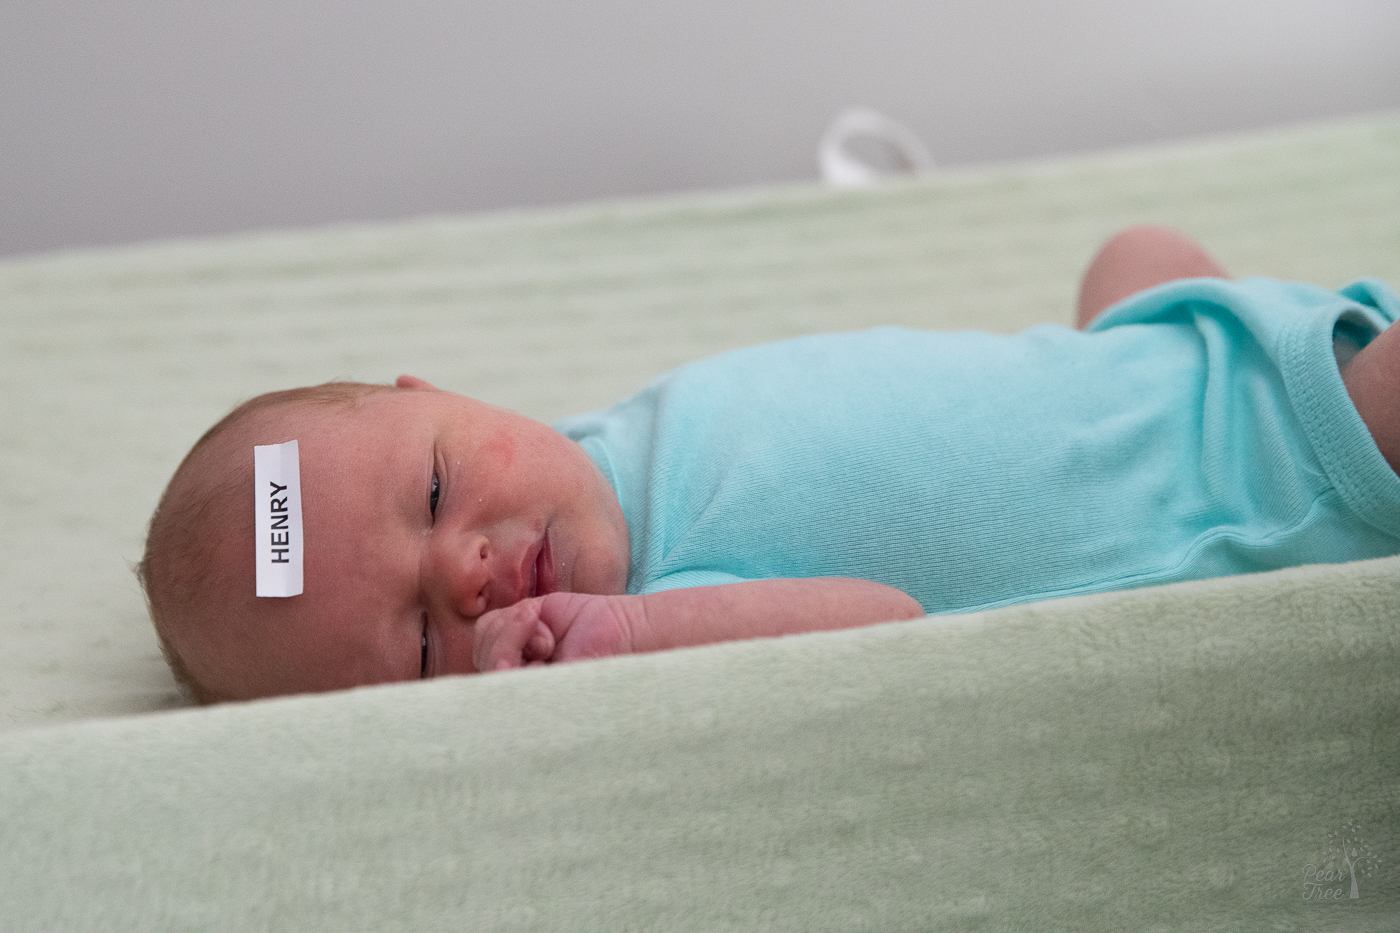 Newborn baby boy with a label of his name Henry stuck to his forehead